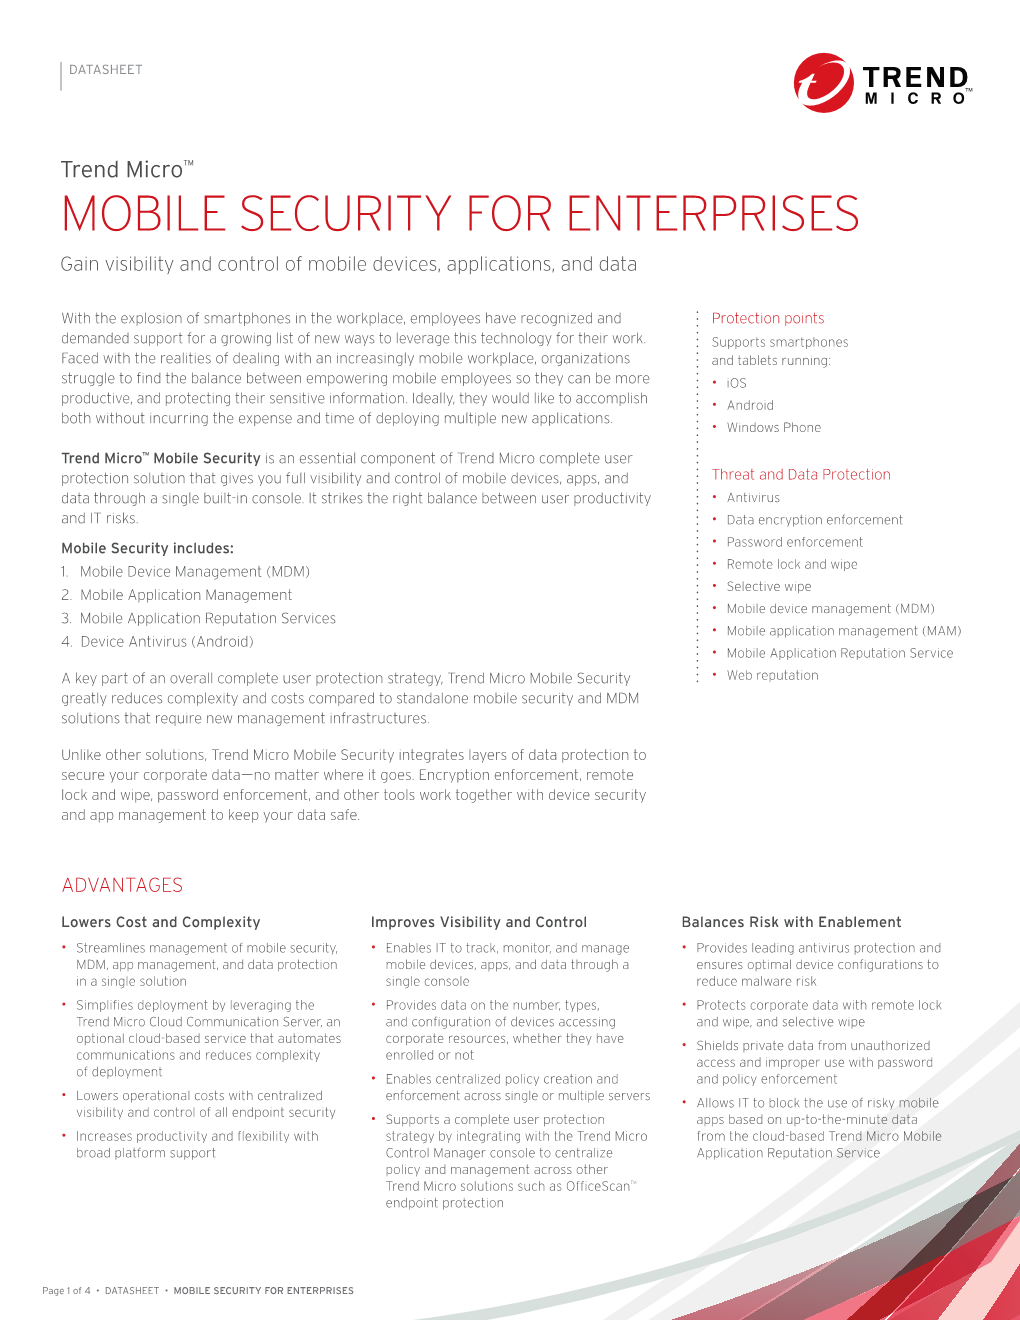 Mobile Security for Enterprises Gain Visibility and Control of Mobile Devices, Applications, and Data